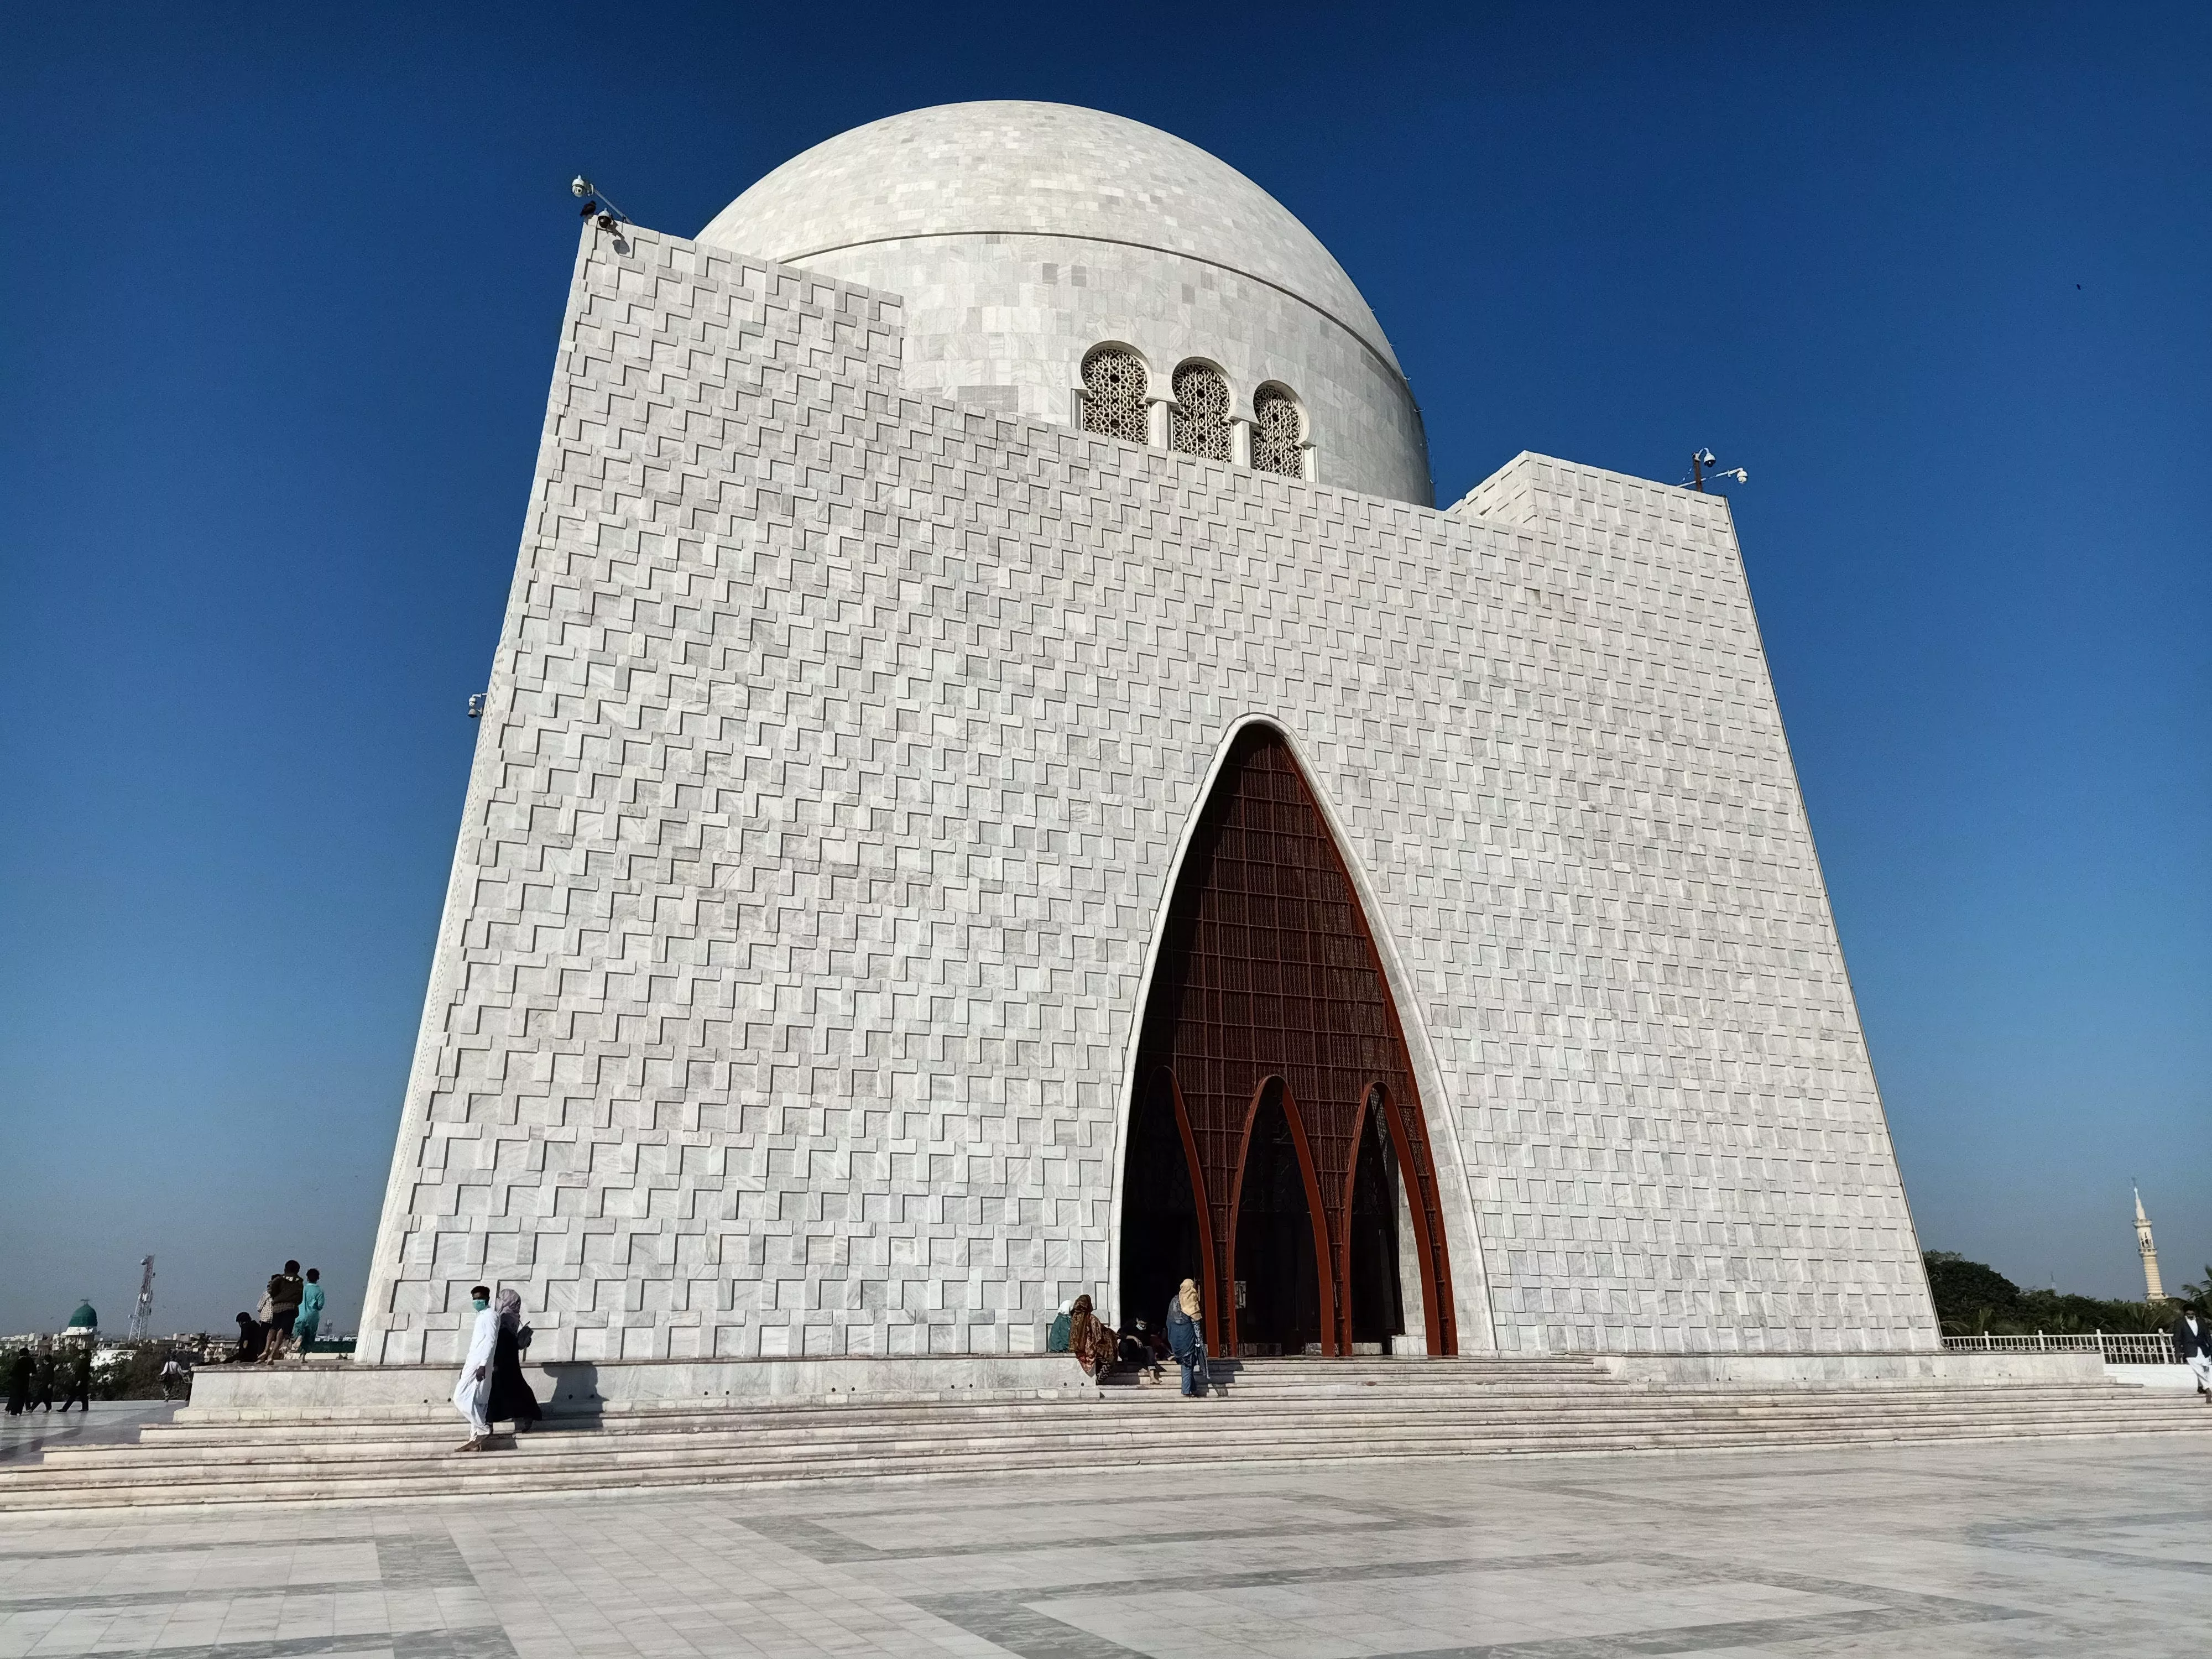 Jinnah Mausoleum in Pakistan, South Asia | Architecture - Rated 3.9